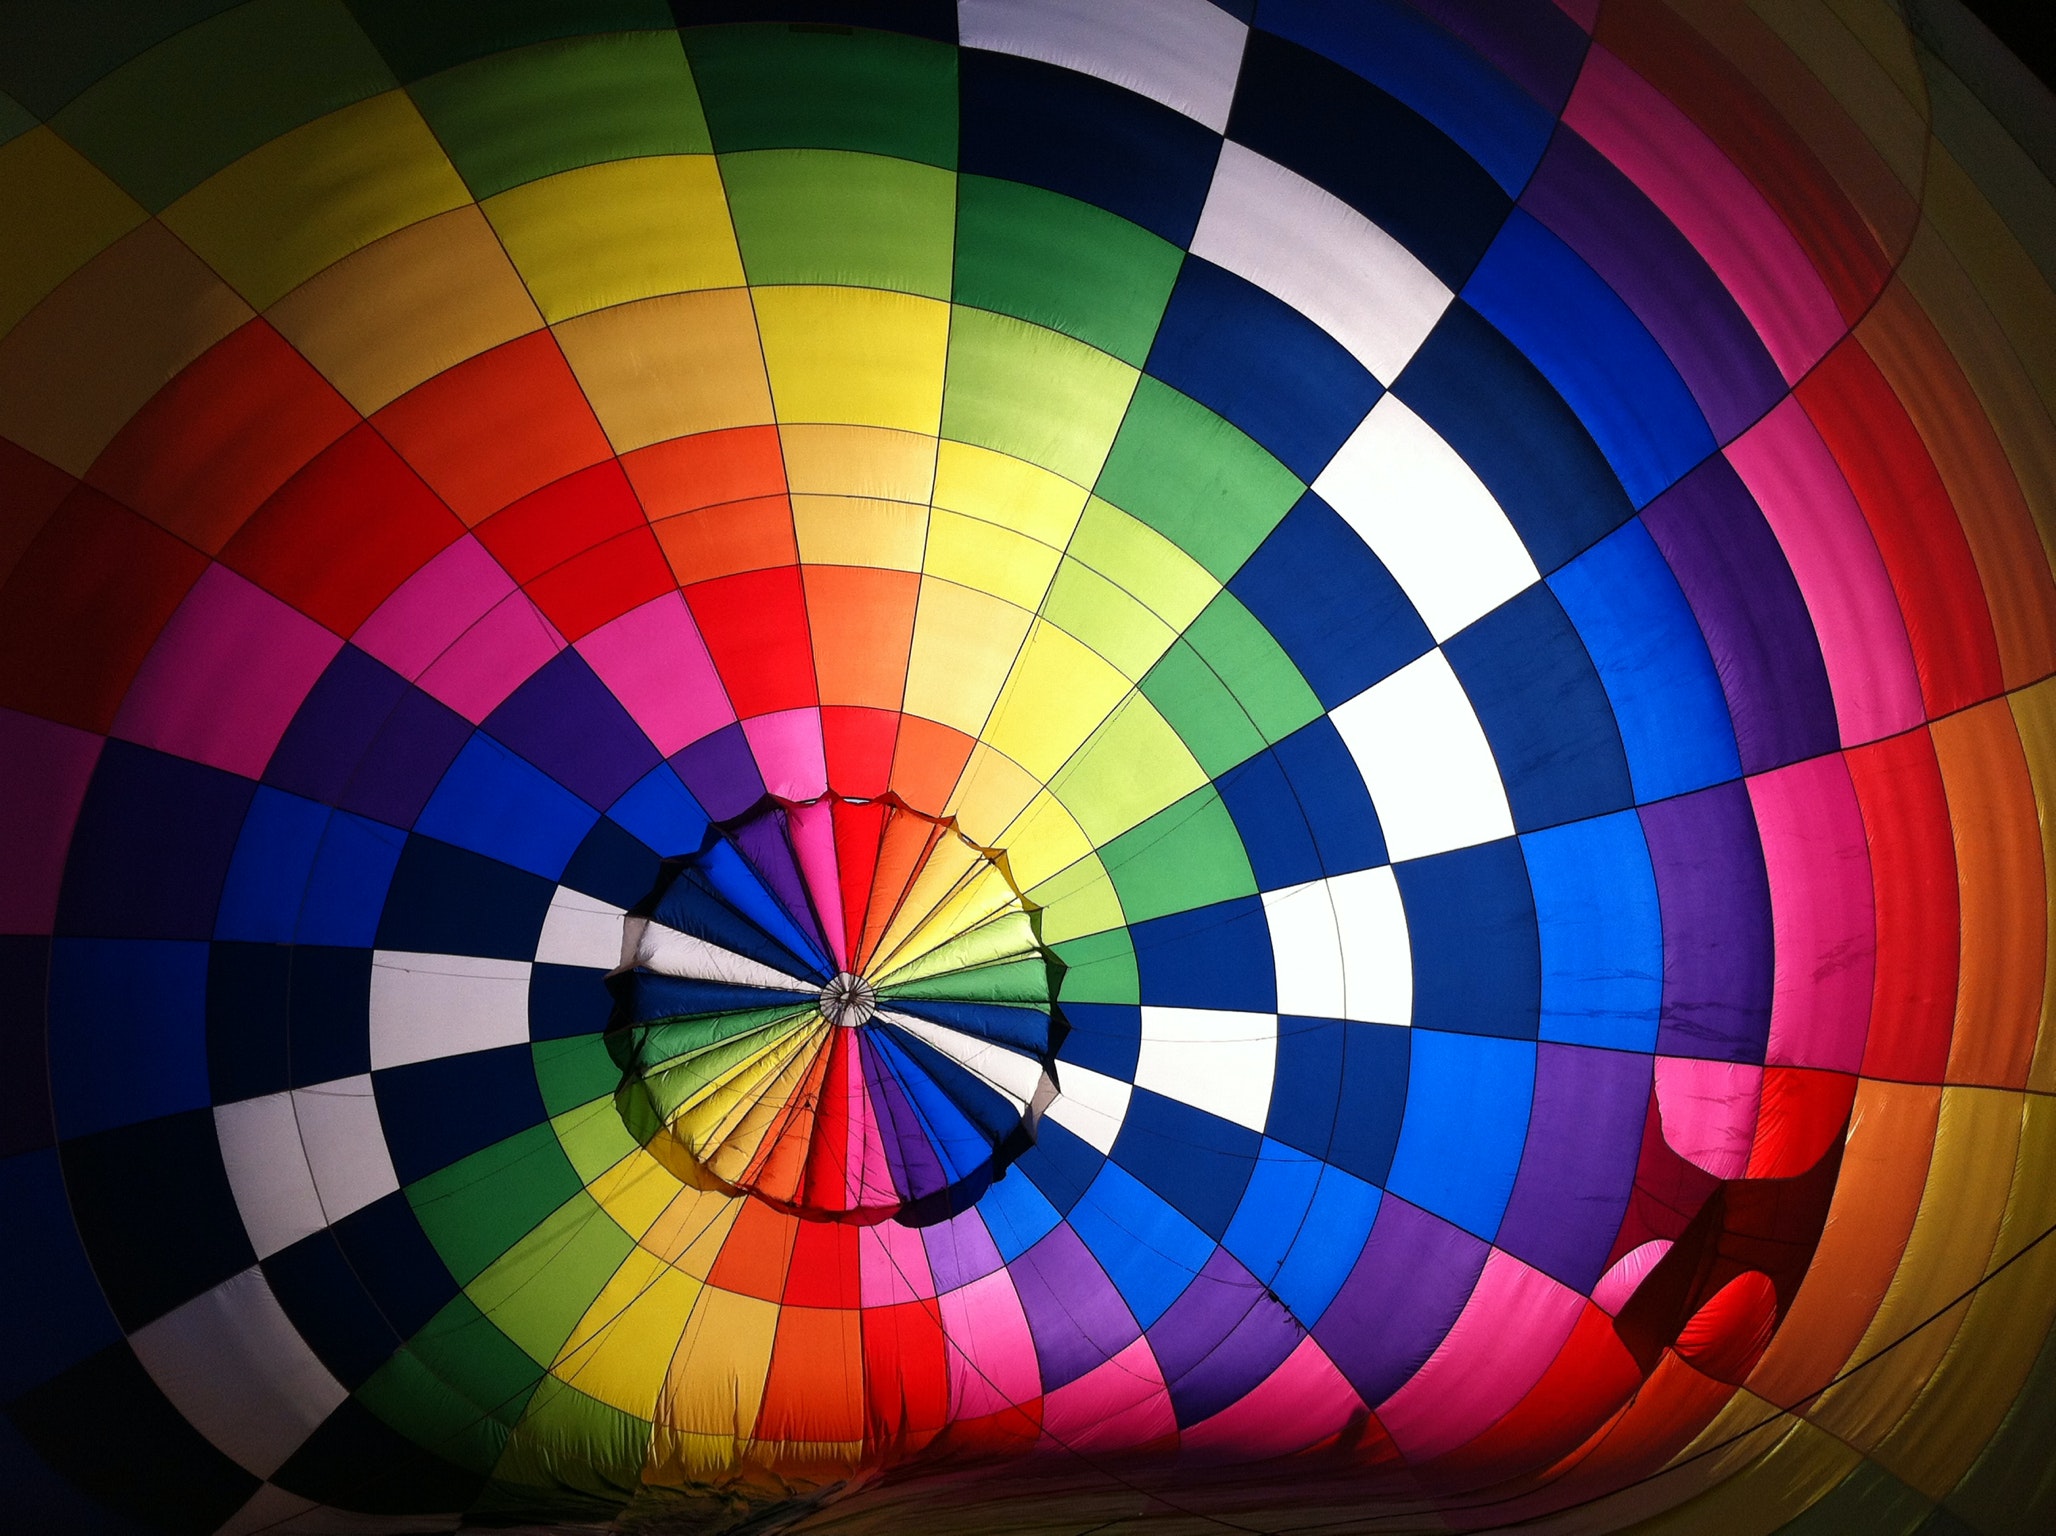 The inside of a colourful hot air balloon